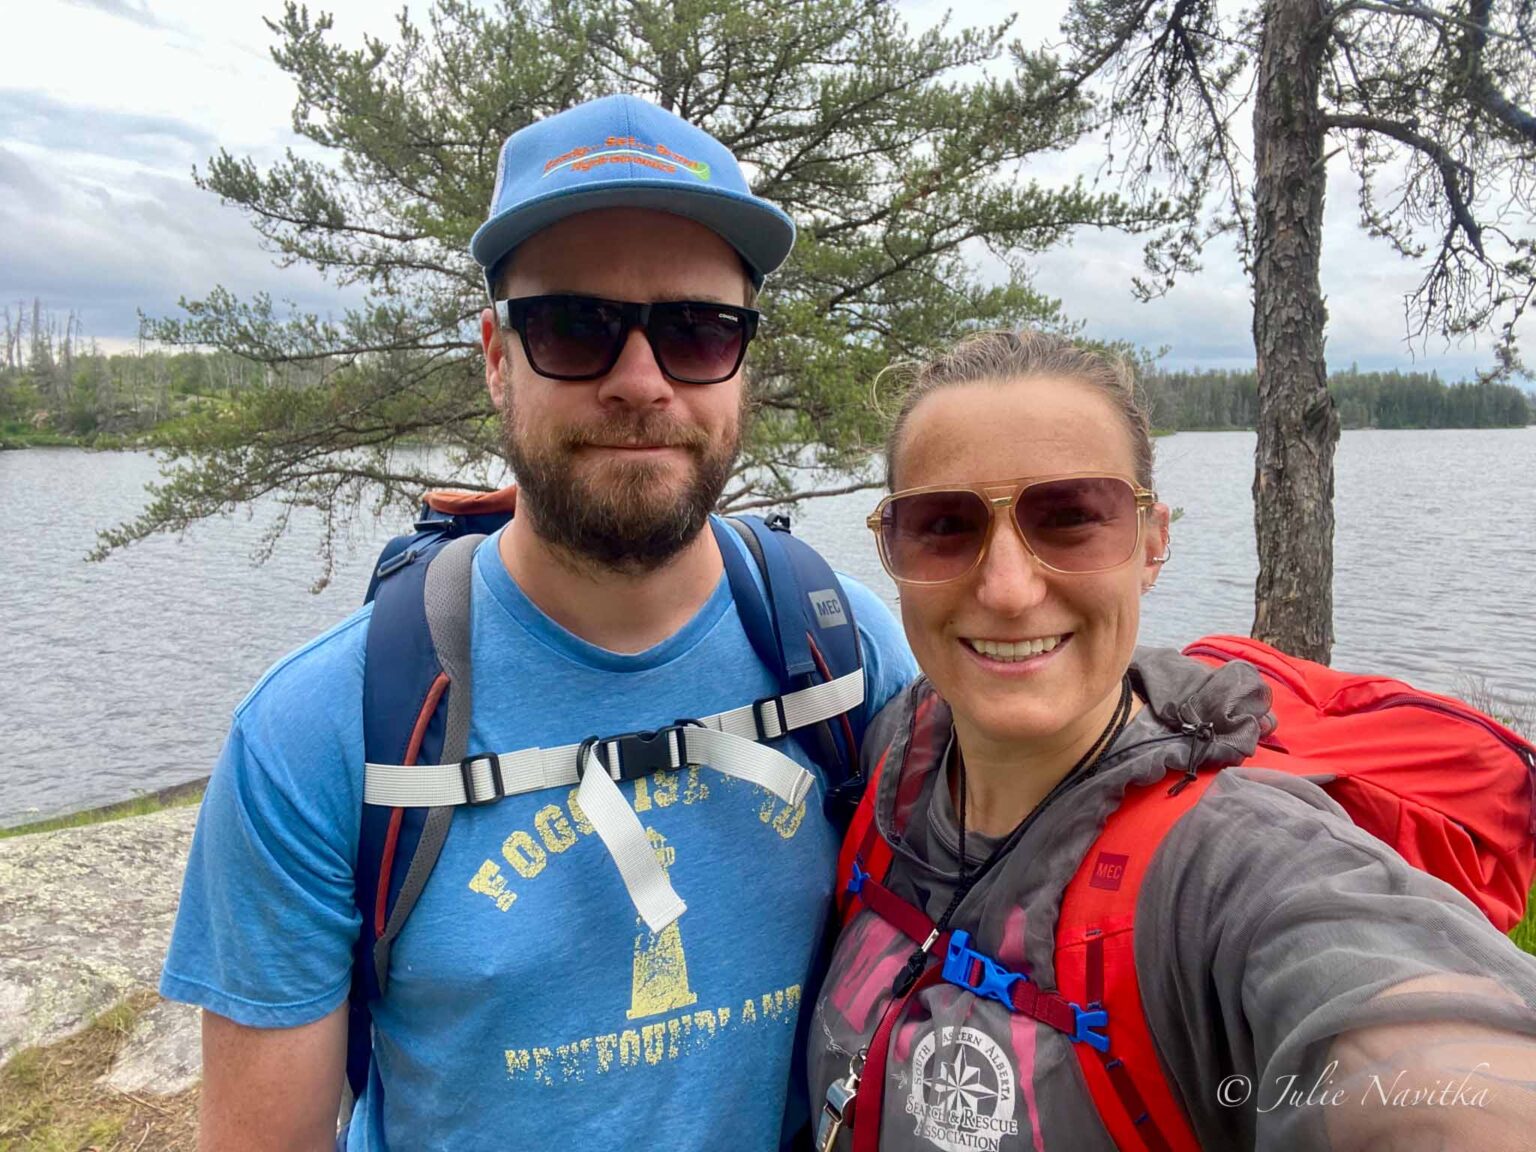 Image of a couple wearing hiking backpacks standing in front of a tree and lake. Being mindful of your impact on the environment is part of sustainable recreation.